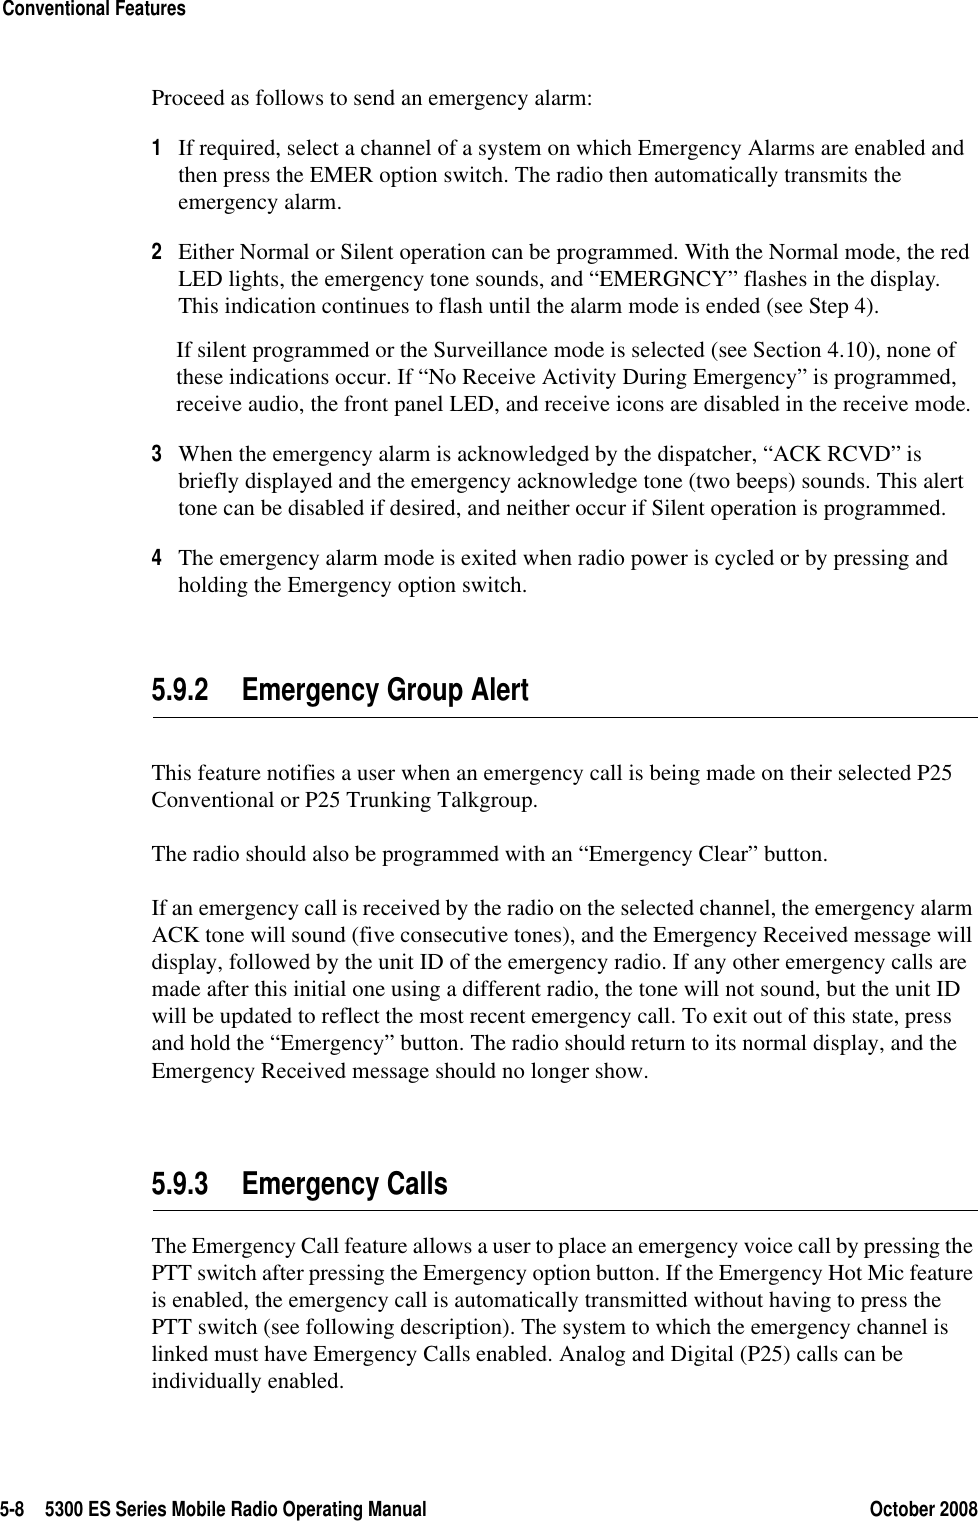 5-8 5300 ES Series Mobile Radio Operating Manual October 2008Conventional FeaturesProceed as follows to send an emergency alarm:1If required, select a channel of a system on which Emergency Alarms are enabled and then press the EMER option switch. The radio then automatically transmits the emergency alarm.2Either Normal or Silent operation can be programmed. With the Normal mode, the red LED lights, the emergency tone sounds, and “EMERGNCY” flashes in the display. This indication continues to flash until the alarm mode is ended (see Step 4).If silent programmed or the Surveillance mode is selected (see Section 4.10), none of these indications occur. If “No Receive Activity During Emergency” is programmed, receive audio, the front panel LED, and receive icons are disabled in the receive mode.3When the emergency alarm is acknowledged by the dispatcher, “ACK RCVD” is briefly displayed and the emergency acknowledge tone (two beeps) sounds. This alert tone can be disabled if desired, and neither occur if Silent operation is programmed.4The emergency alarm mode is exited when radio power is cycled or by pressing and holding the Emergency option switch.5.9.2 Emergency Group AlertThis feature notifies a user when an emergency call is being made on their selected P25 Conventional or P25 Trunking Talkgroup.The radio should also be programmed with an “Emergency Clear” button.If an emergency call is received by the radio on the selected channel, the emergency alarm ACK tone will sound (five consecutive tones), and the Emergency Received message will display, followed by the unit ID of the emergency radio. If any other emergency calls are made after this initial one using a different radio, the tone will not sound, but the unit ID will be updated to reflect the most recent emergency call. To exit out of this state, press and hold the “Emergency” button. The radio should return to its normal display, and the Emergency Received message should no longer show.5.9.3 Emergency CallsThe Emergency Call feature allows a user to place an emergency voice call by pressing the PTT switch after pressing the Emergency option button. If the Emergency Hot Mic feature is enabled, the emergency call is automatically transmitted without having to press the PTT switch (see following description). The system to which the emergency channel is linked must have Emergency Calls enabled. Analog and Digital (P25) calls can be individually enabled.